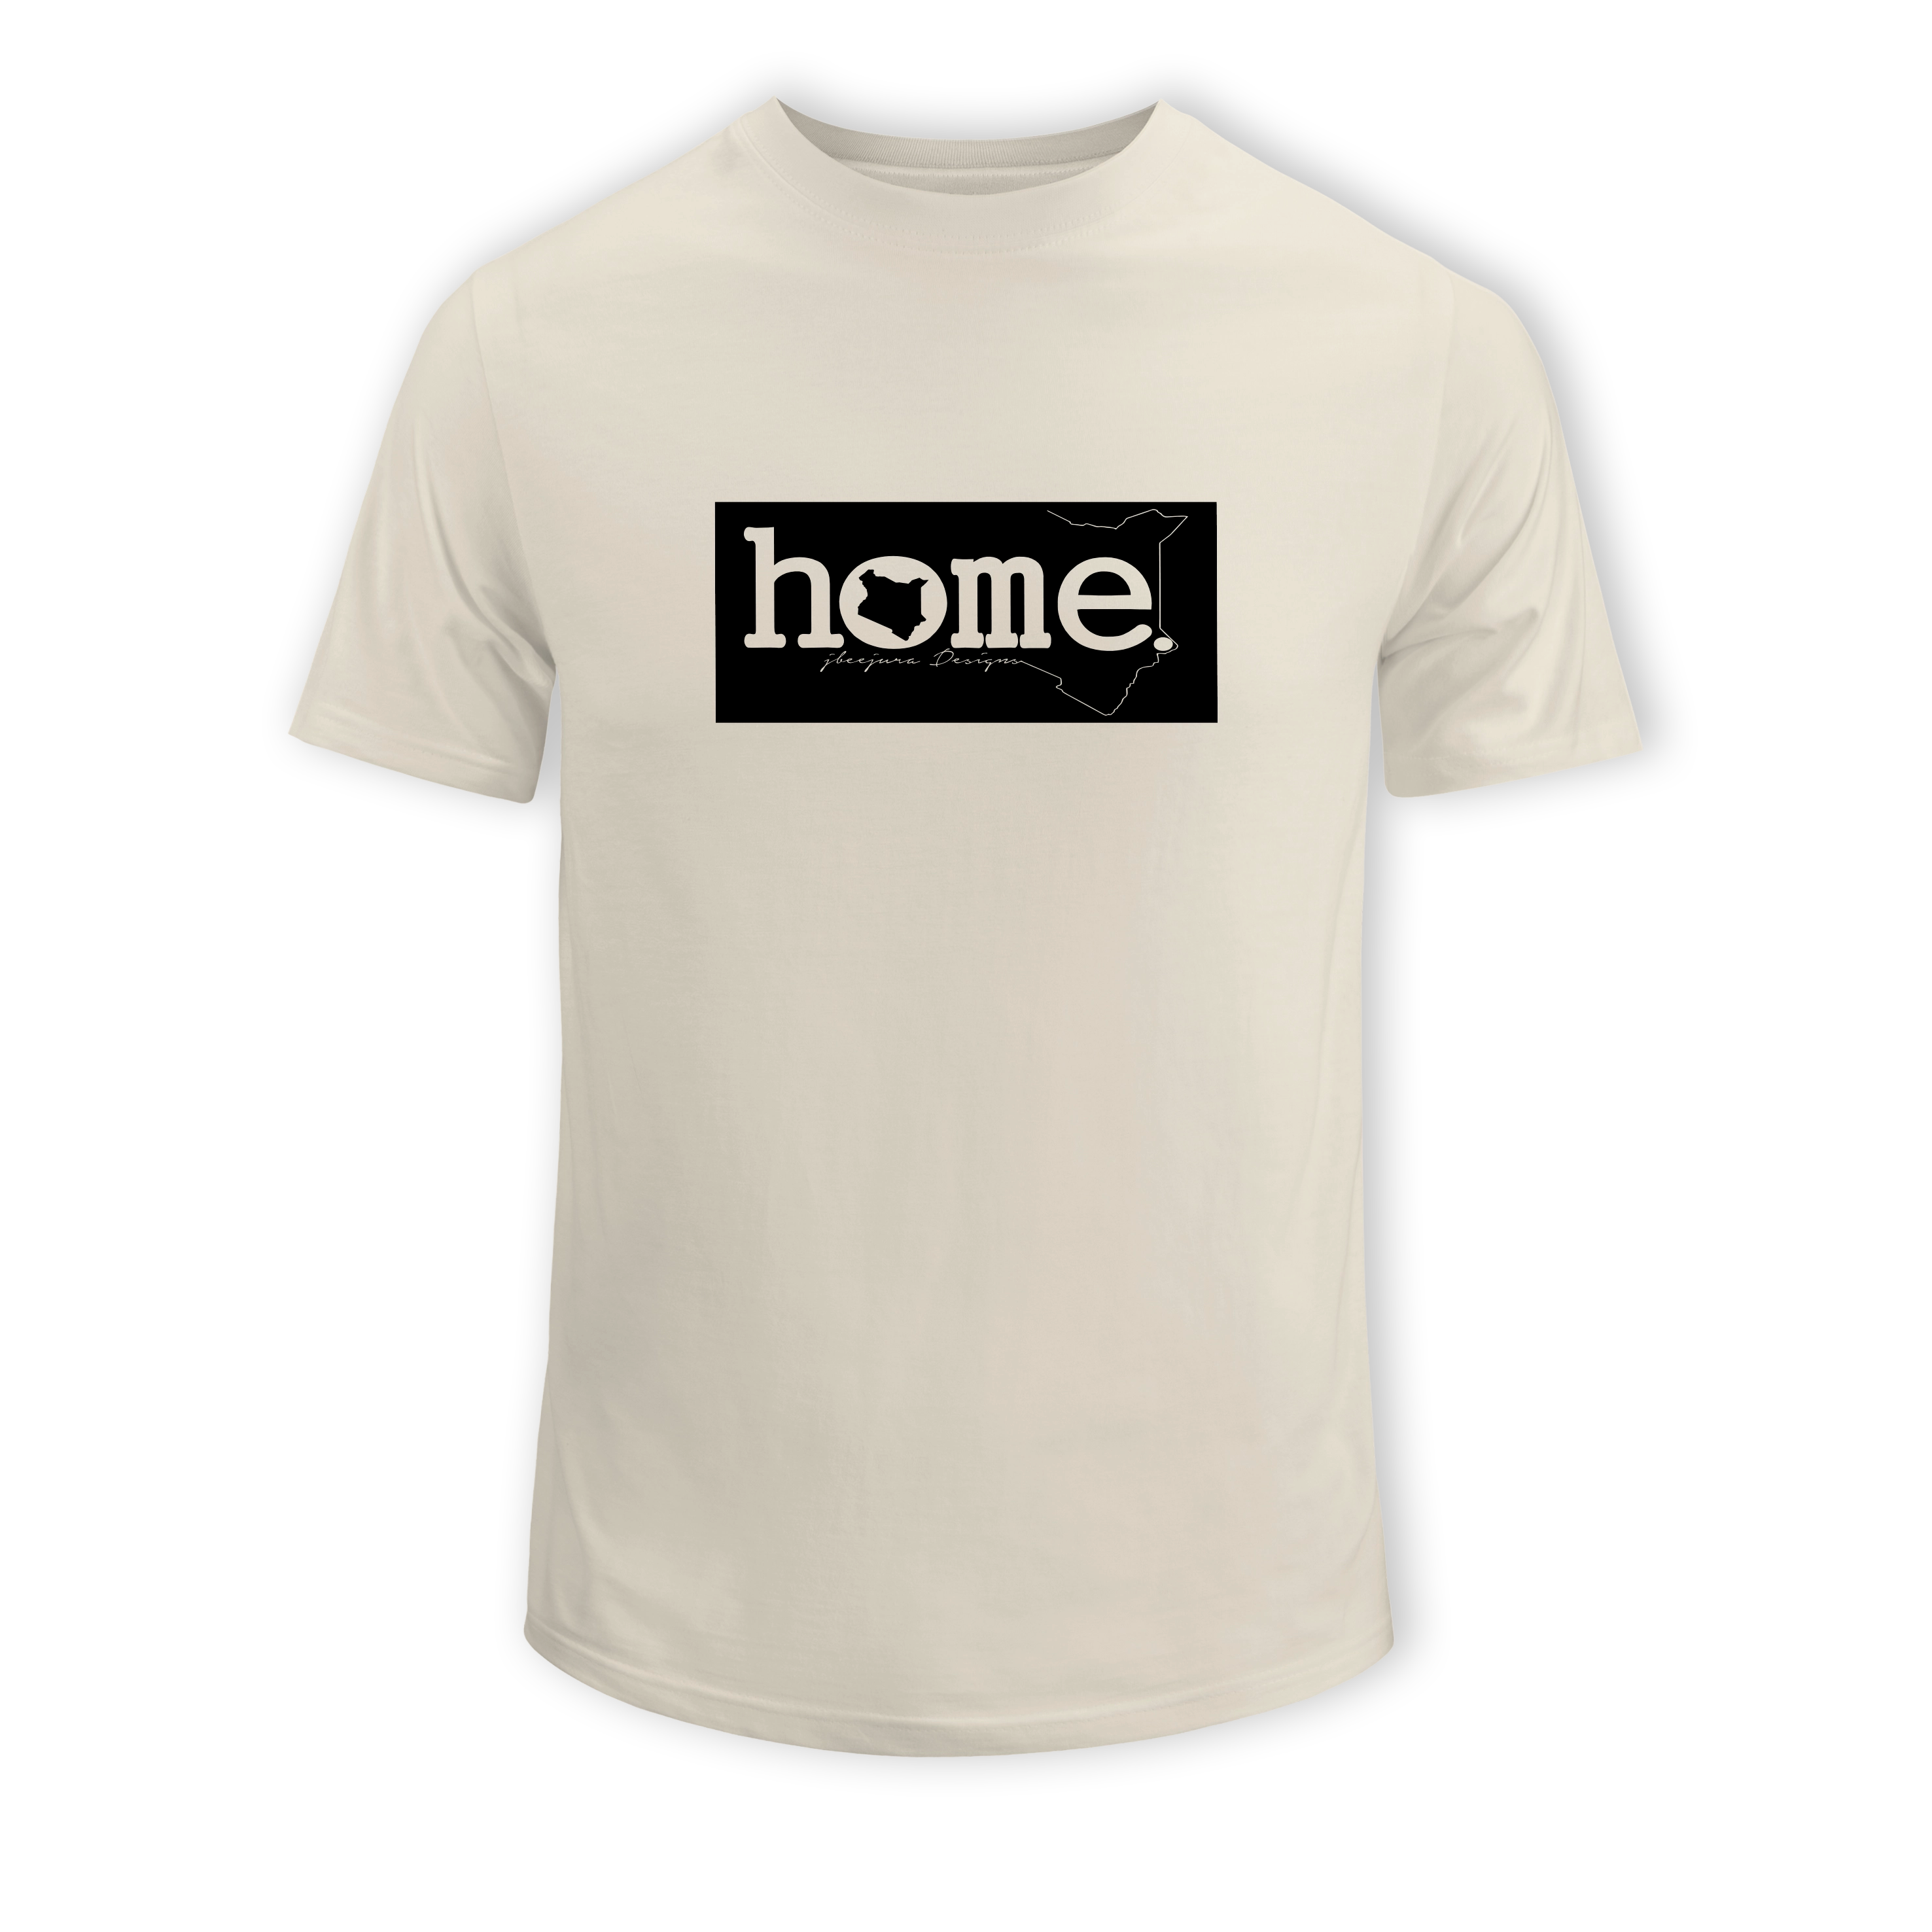 home_254 KIDS SHORT-SLEEVED NUDE T-SHIRT WITH A BLACK CLASSIC PRINT – COTTON PLUS FABRIC